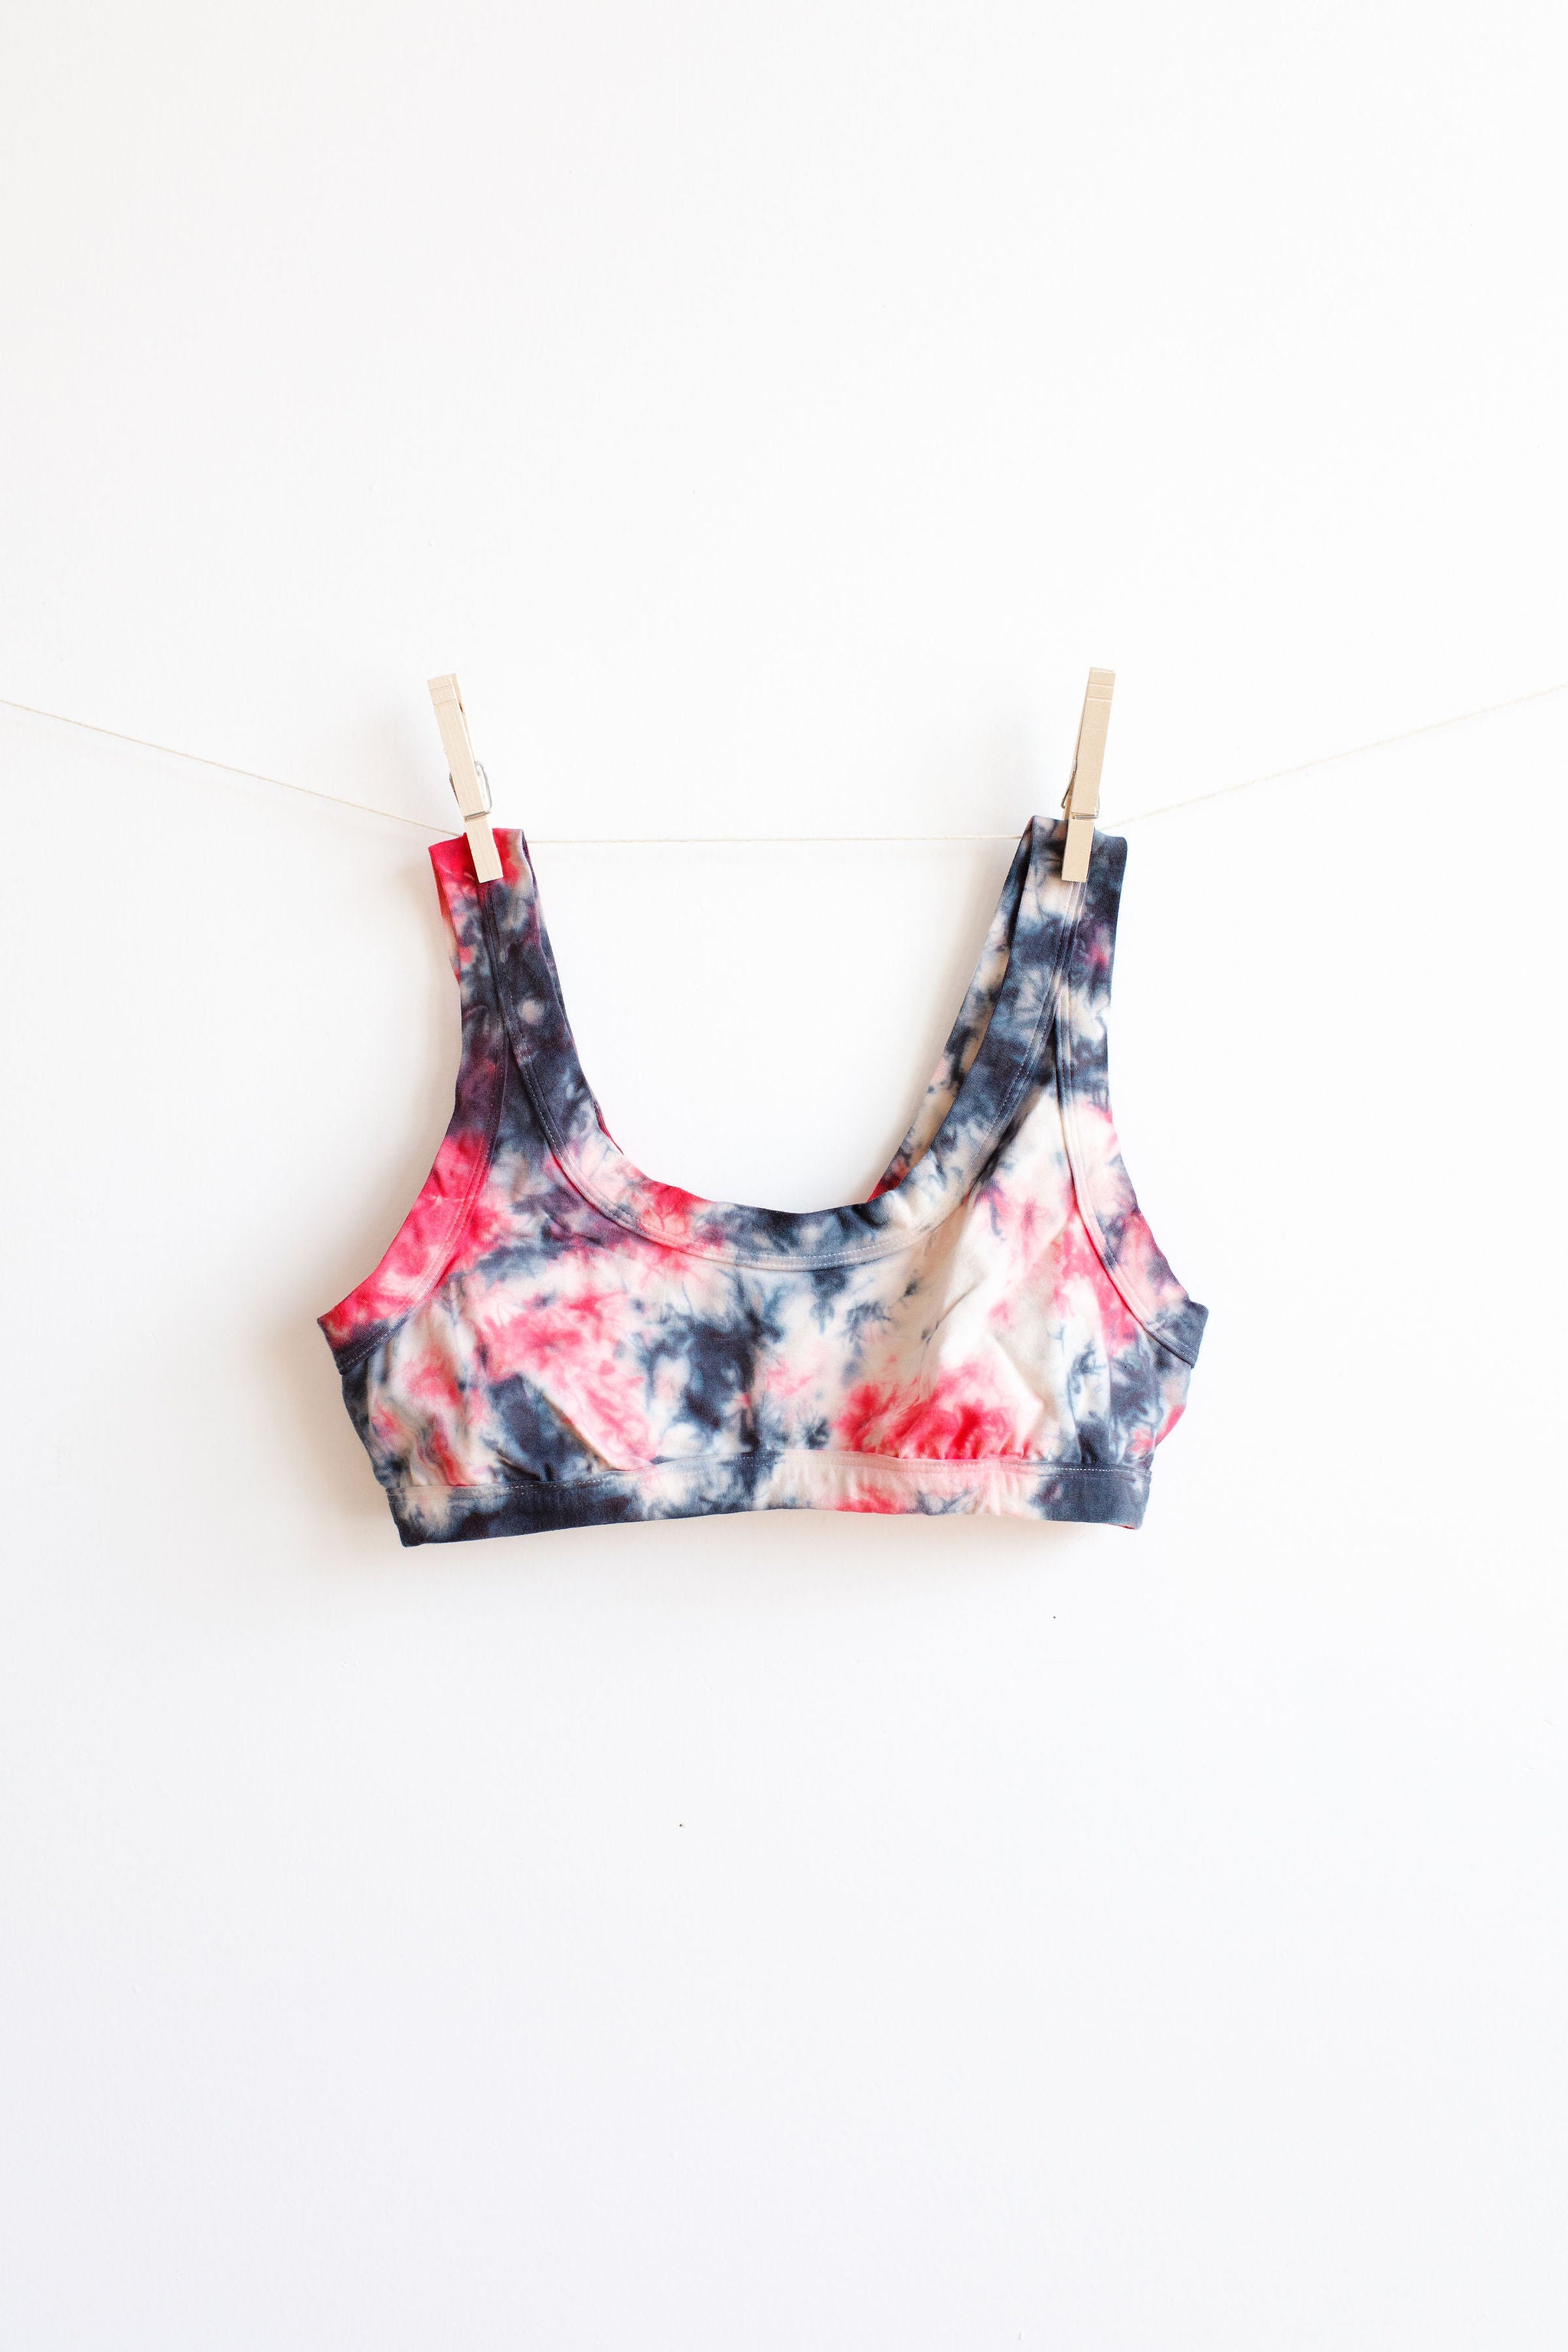 Hanging Thunderpants Bralette with black, red, and white scrunch dye on a white background.